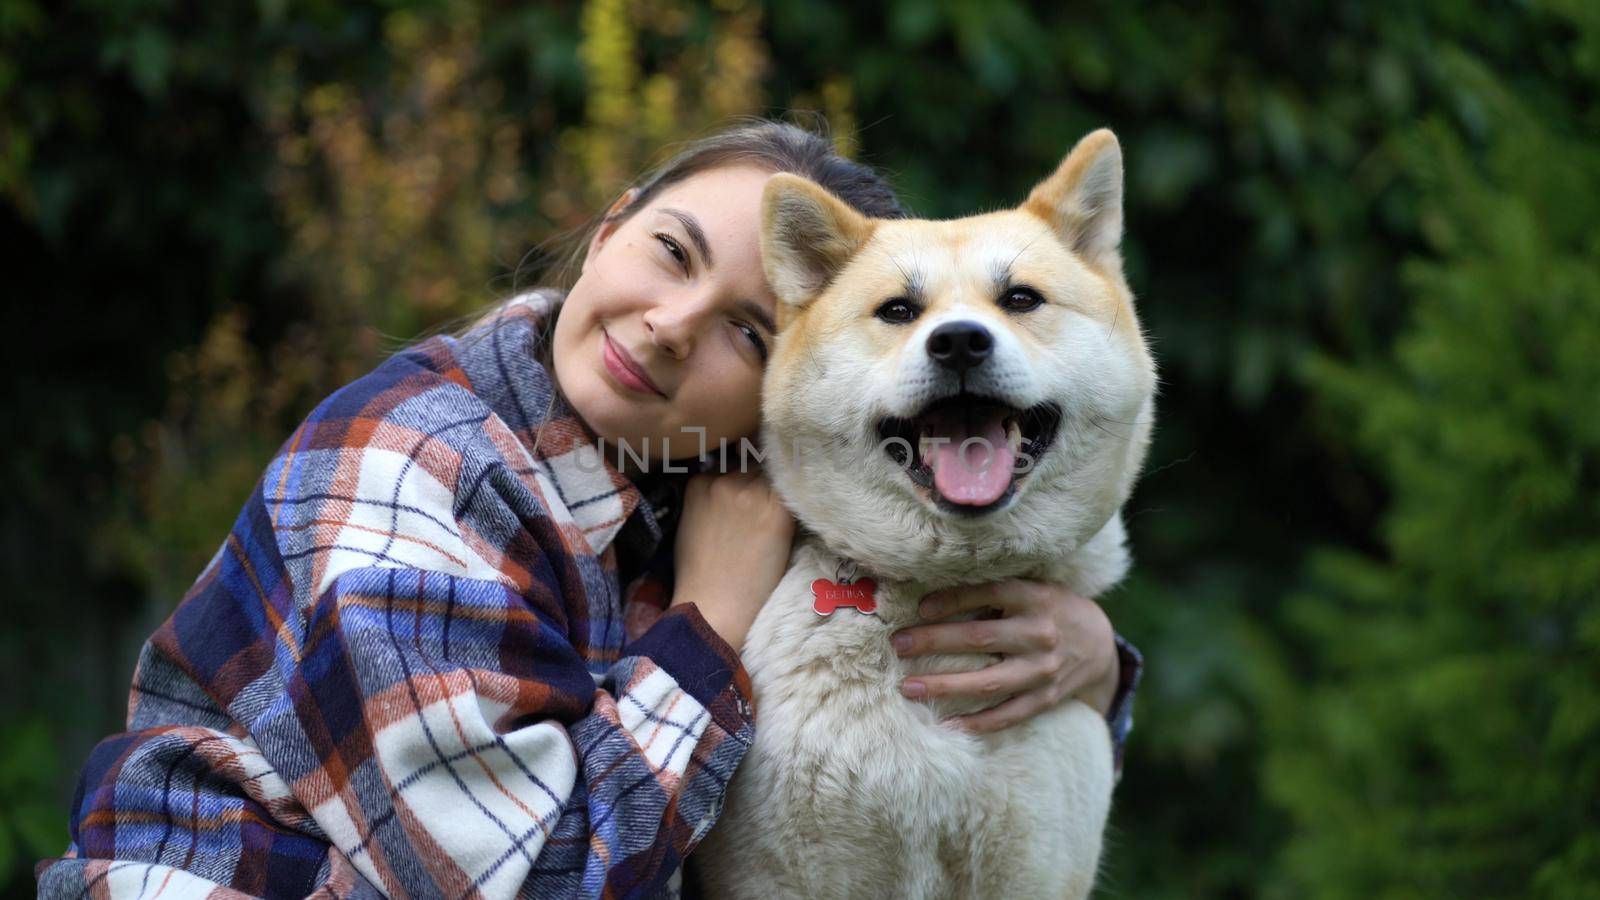 The girl hugs the dog and puts her head on her and look at the camera.